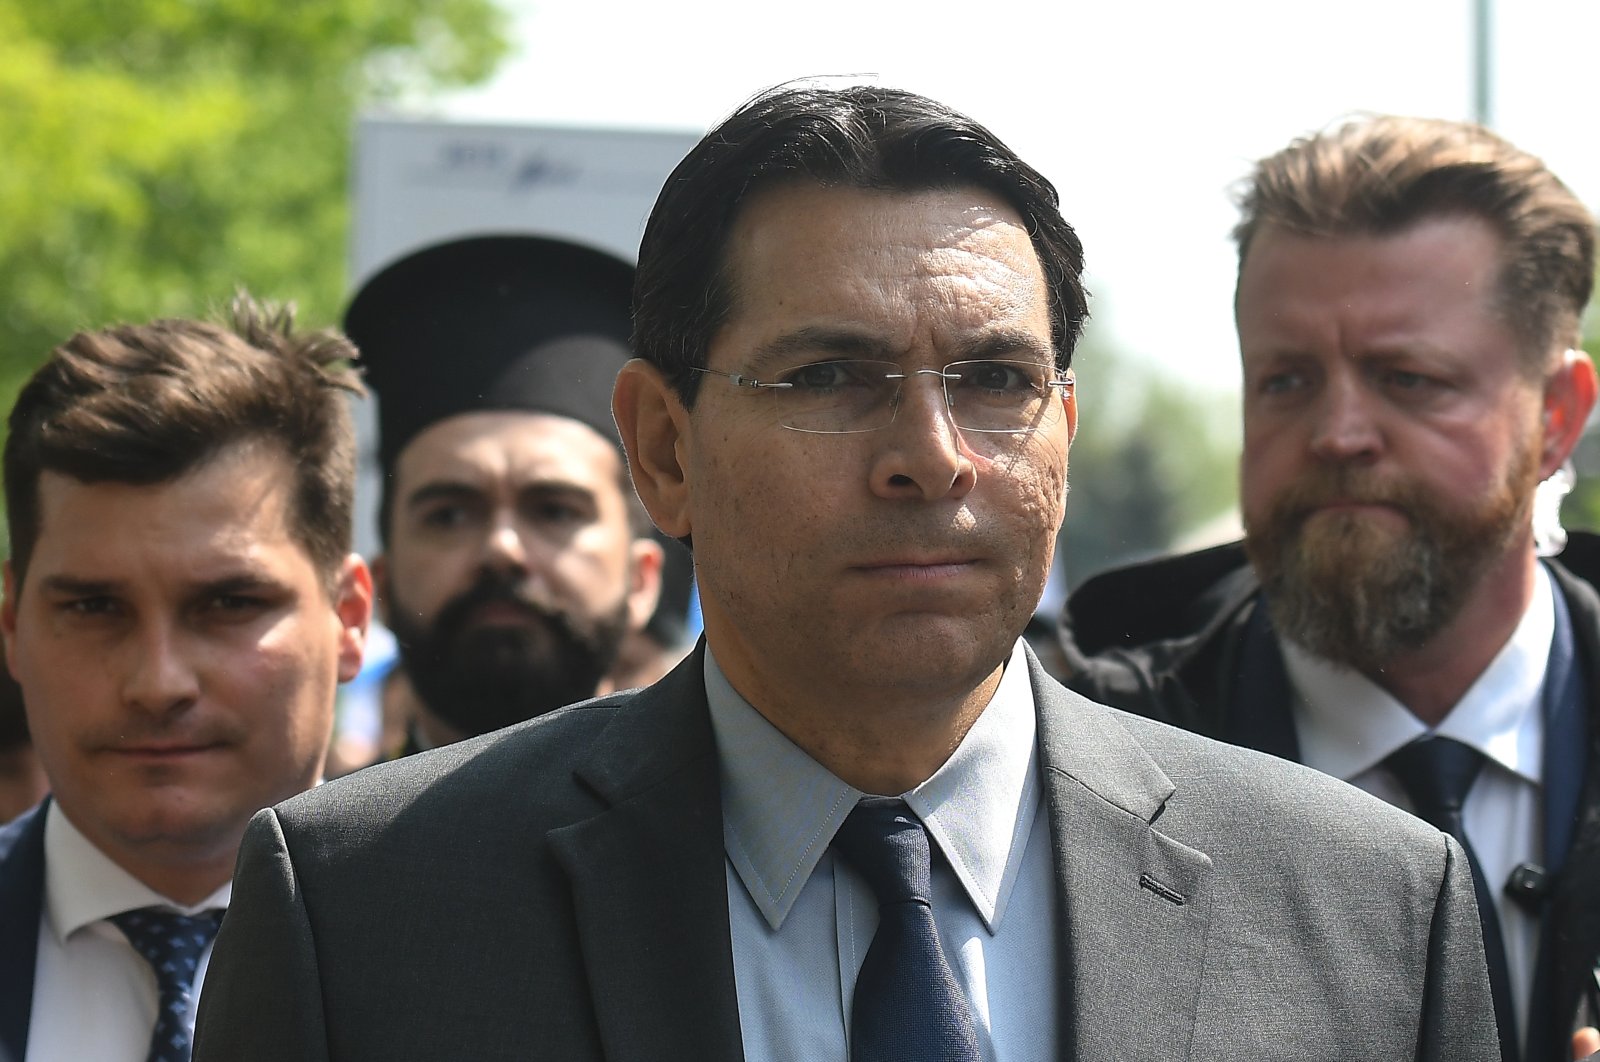 Danny Danon, Israel’s Ambassador to the U.N., at the 31st annual International March of the Living between the former Nazi concentration camps Auschwitz I and Auschwitz-Birkenau in Oswiecim, Poland, on May 2, 2019. (Photo by Artur Widak / NurPhoto, File)